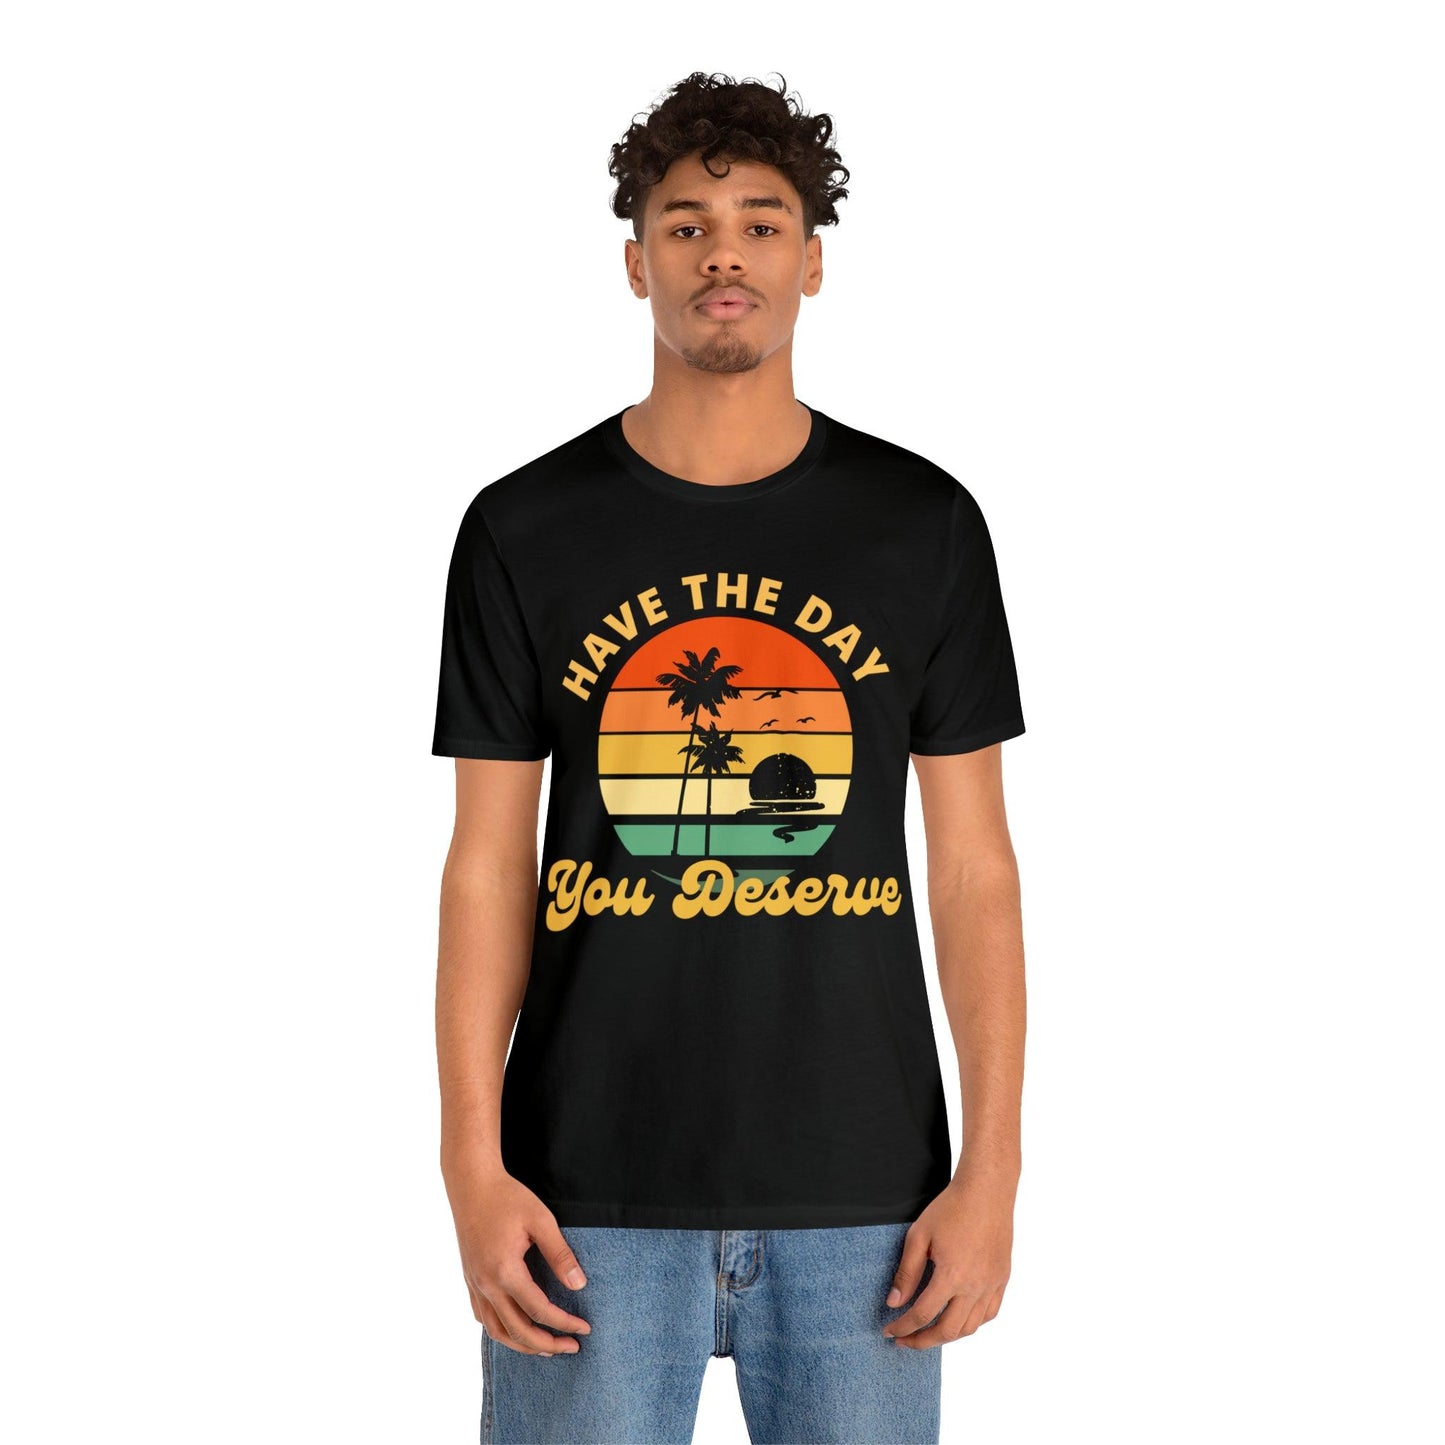 Have the Day You Deserve T-Shirt, Inspirational Graphic Tee, Motivational Tee, Positive Vibes Shirt, Trendy shirt and Eye Catching shirt